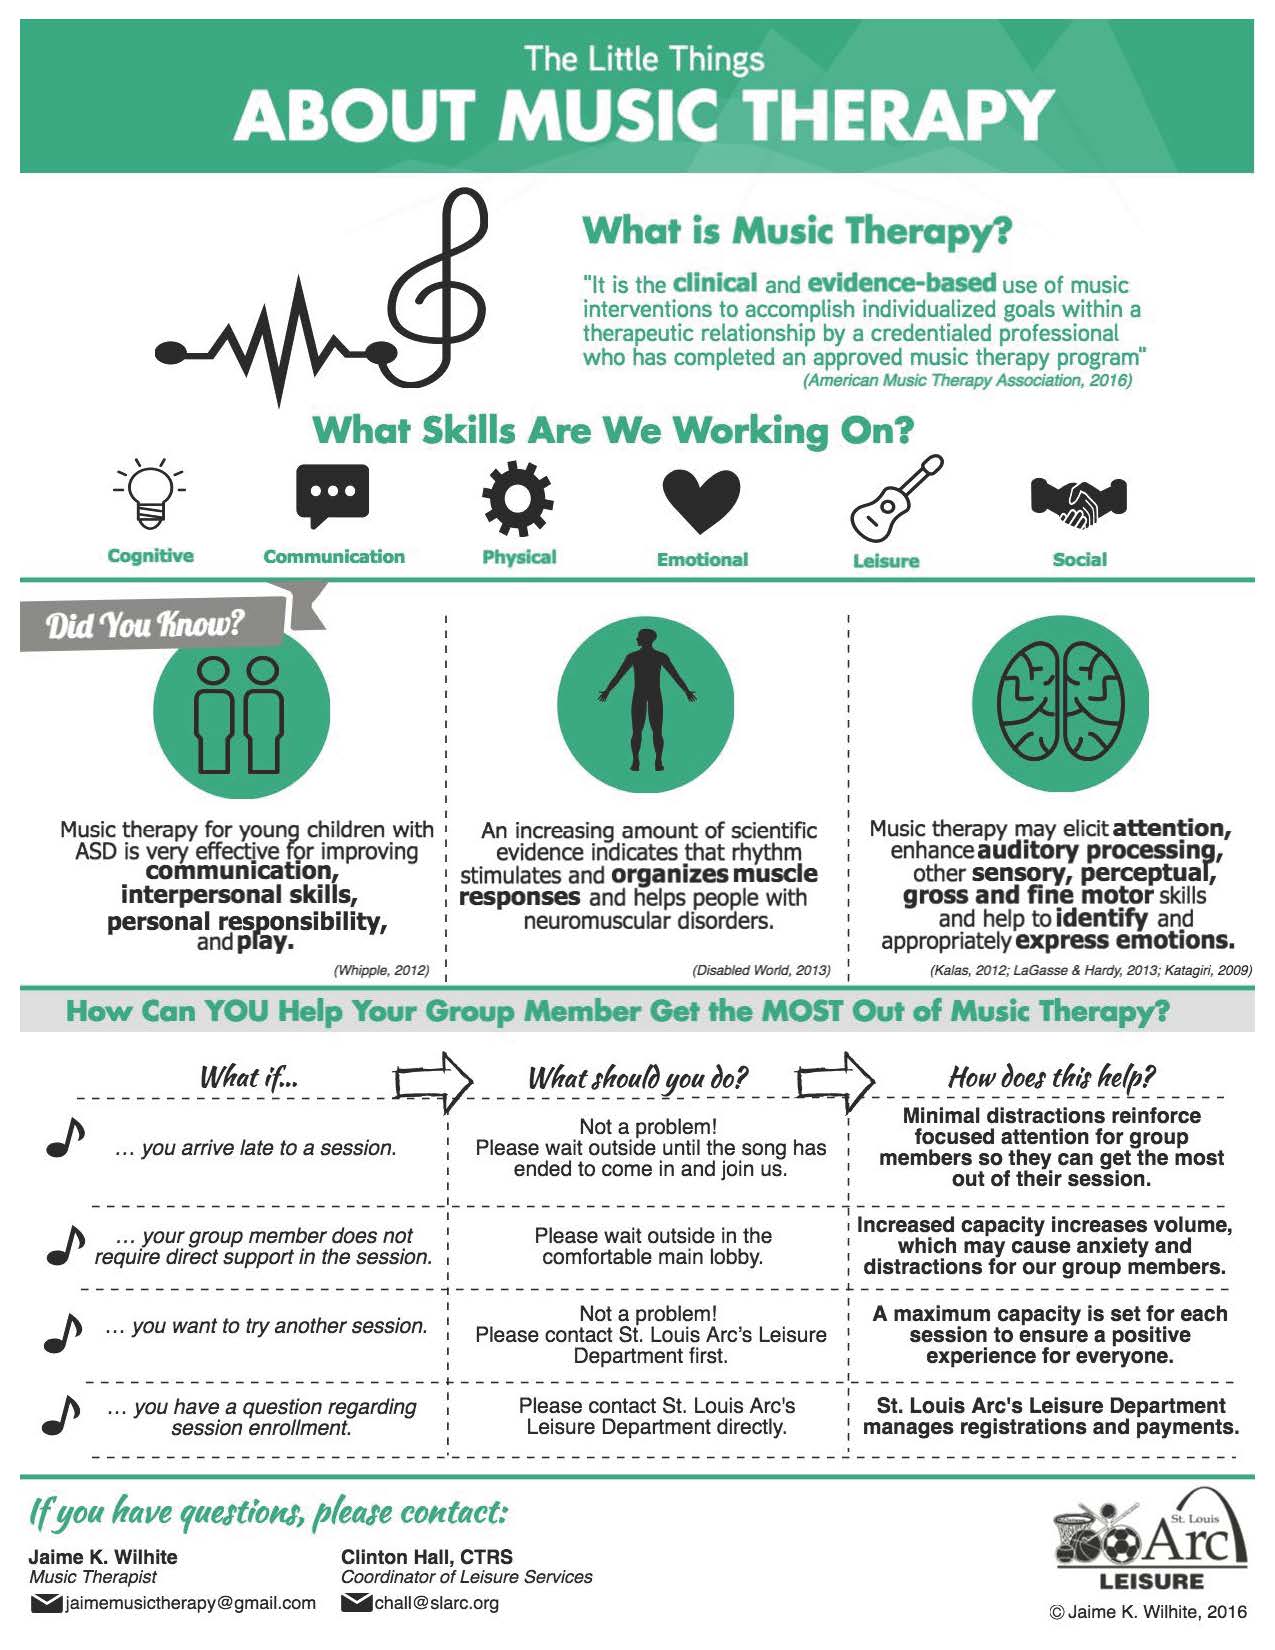 What is Music Therapy